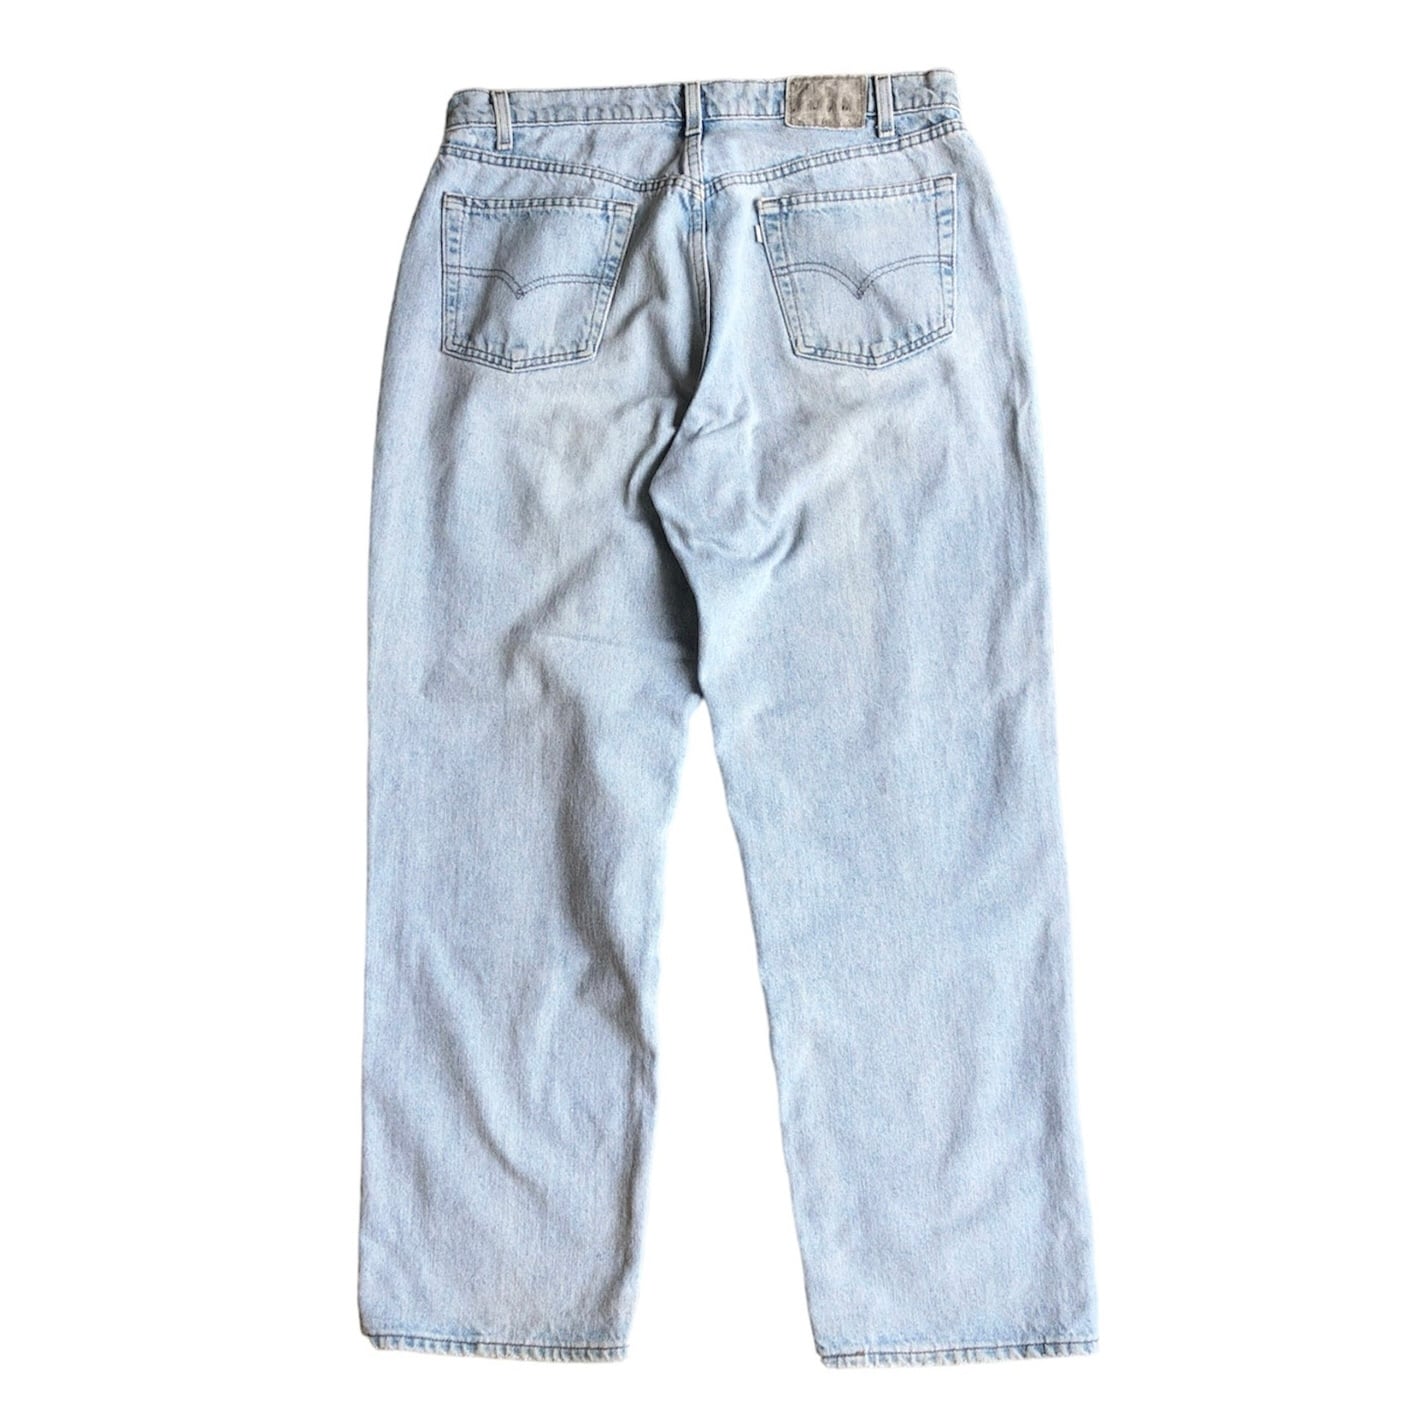 90s   Levi’s  SilverTab  RELAXED